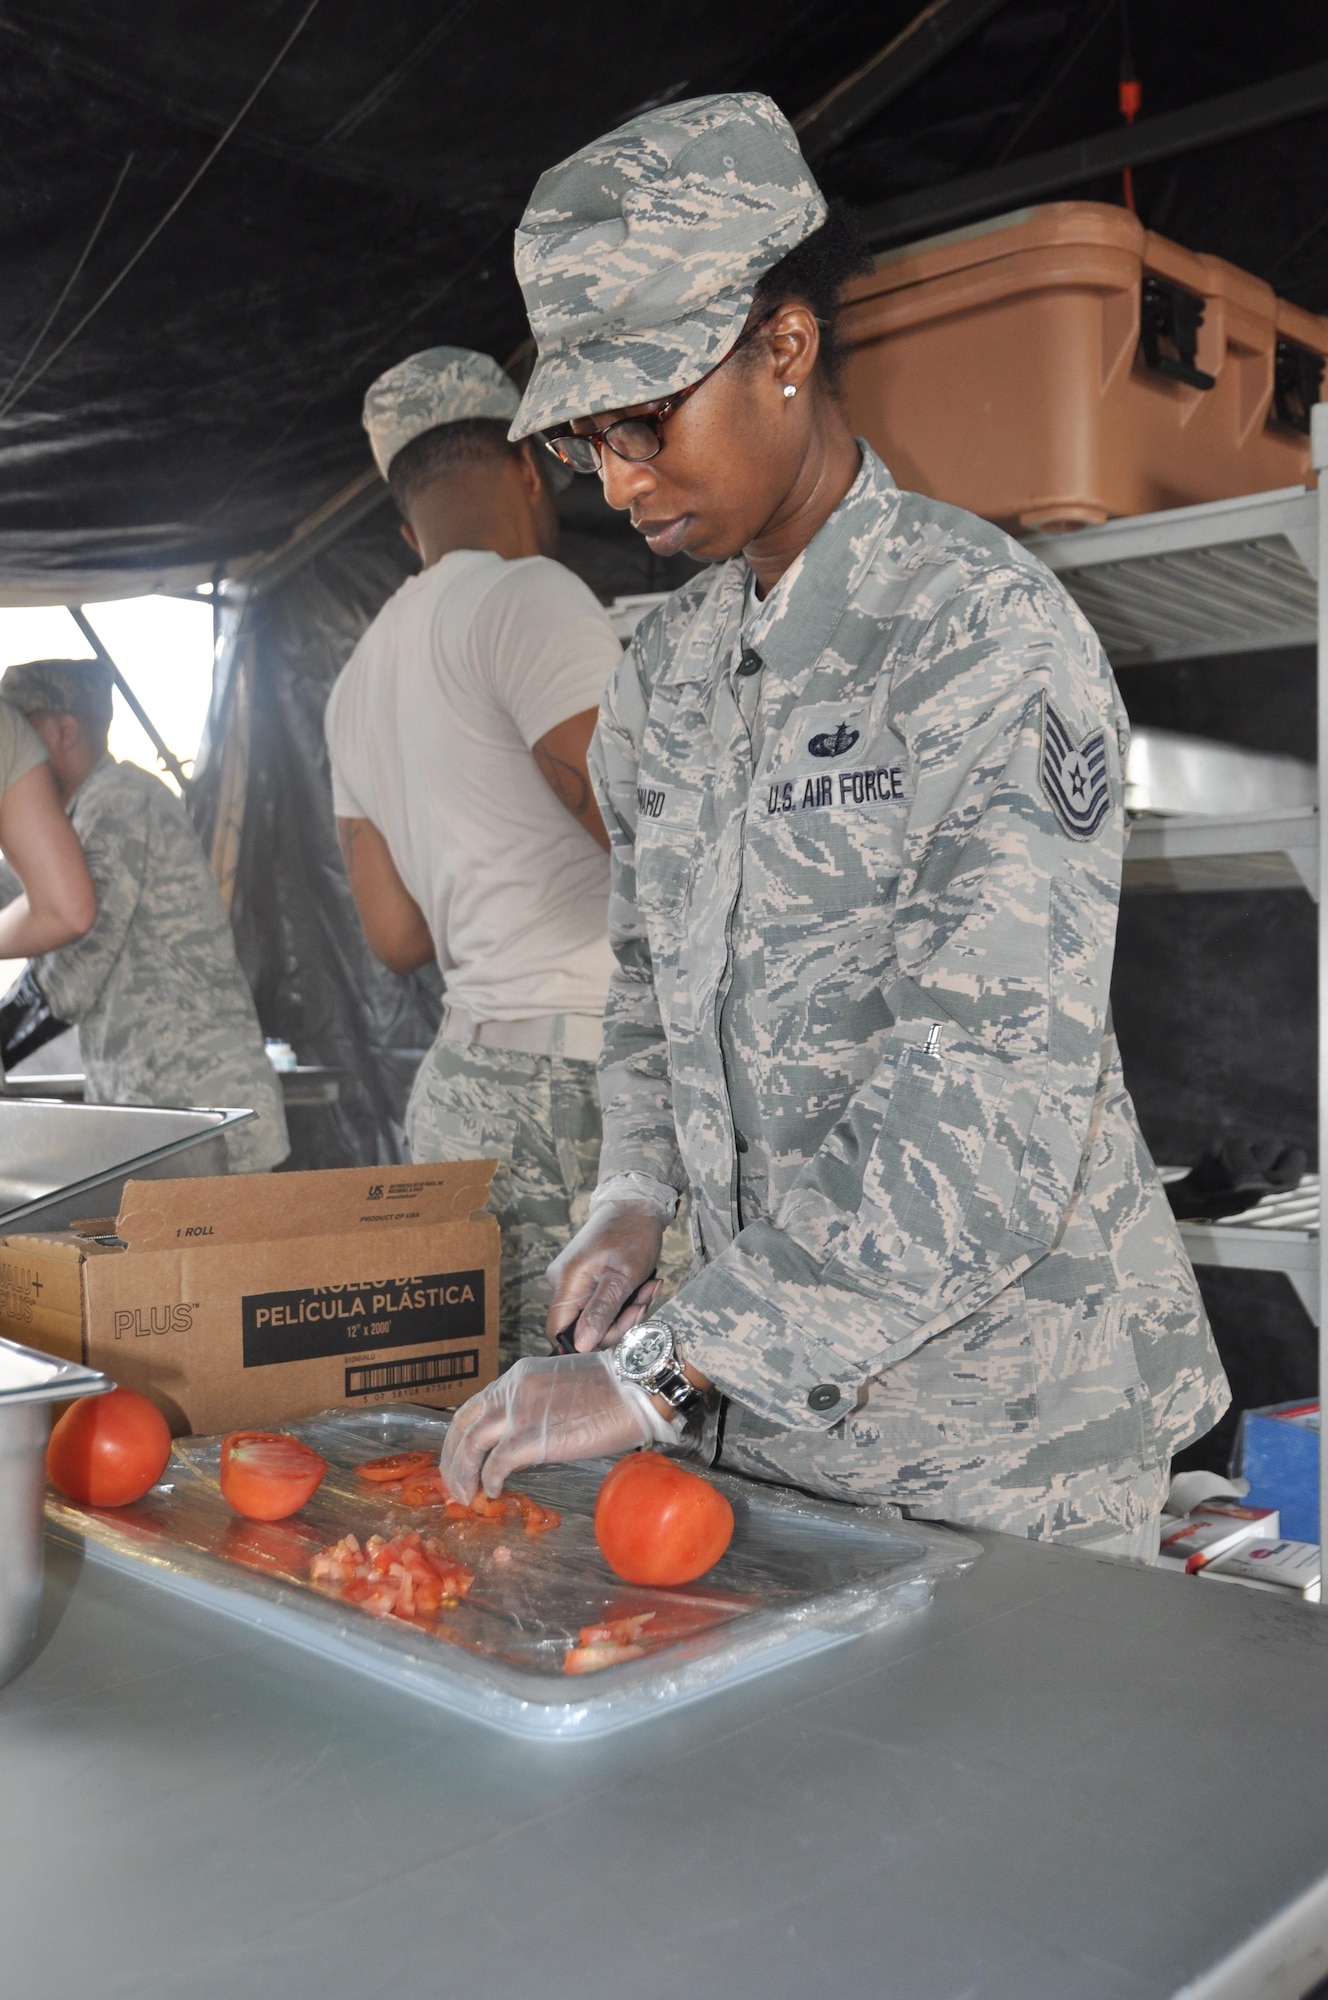 Member of the 908th Airlift Wing’s team during the Hennessy Competition, Tech. Sgt. Tekima Howard slices a tomato Feb. 11 at Maxwell Air Force Base. The 908th is one of four teams competing for the John L. Hennessy Award that recognizes those who best excel in food service. (U.S. Air Force photo by Bradley J. Clark)